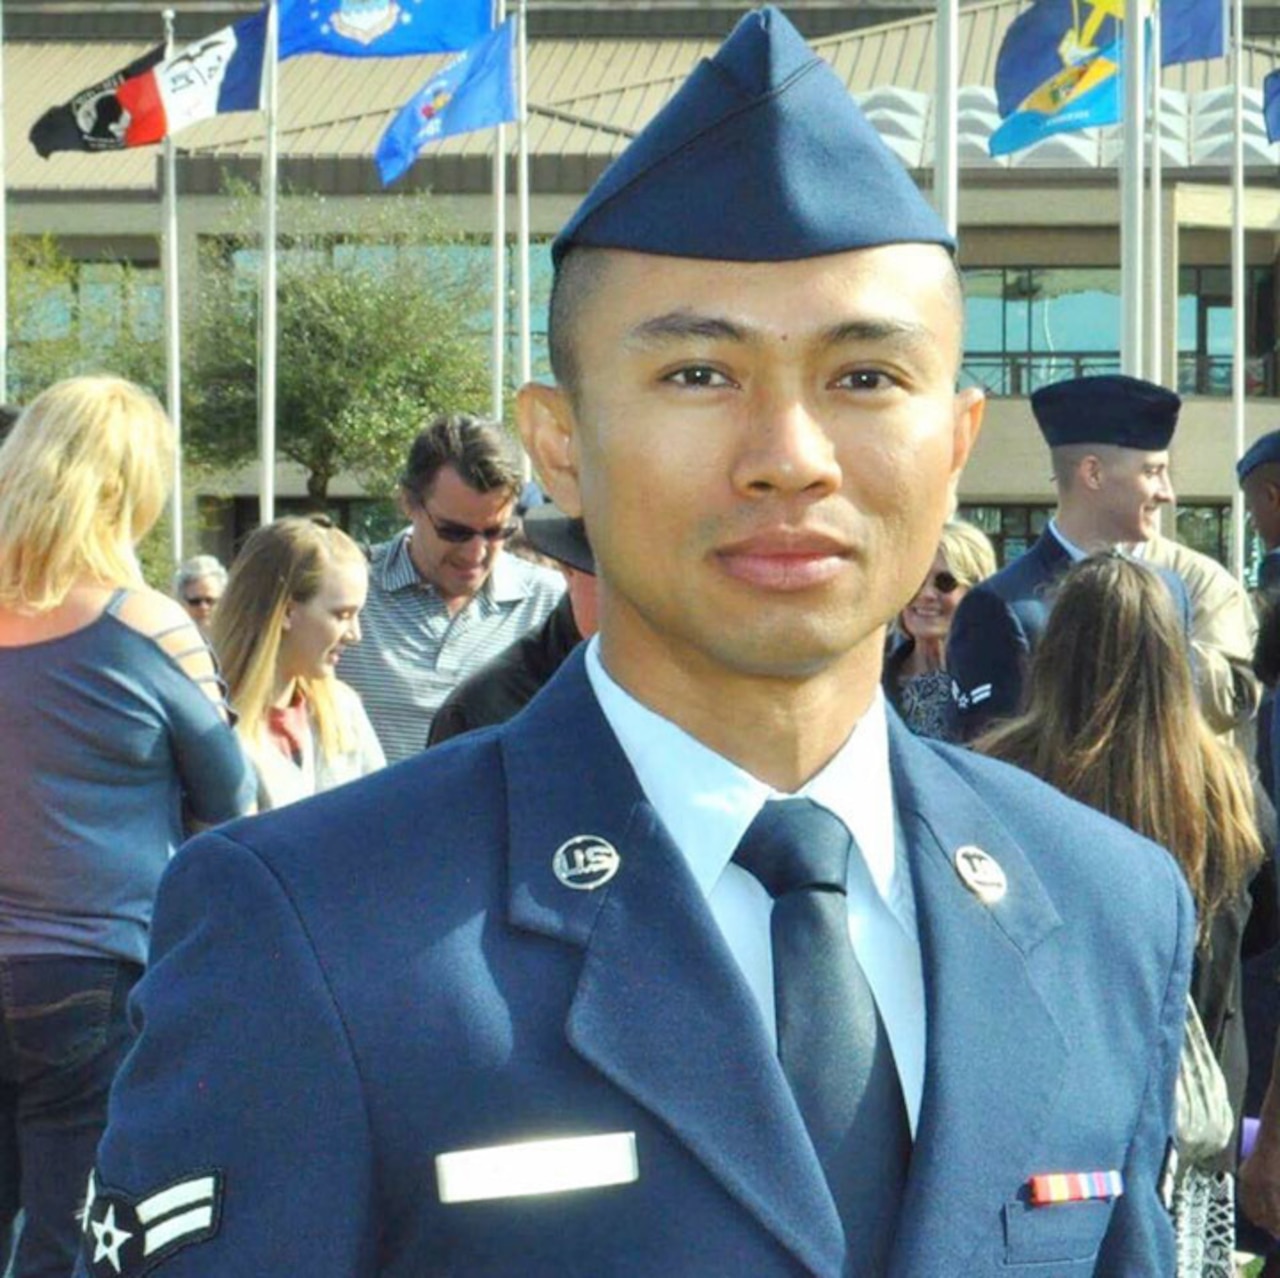 Airman 1st Class Kornkawee Rue Art, 23d Medical Support Squadron pharmacy technician, poses for a photo after graduating basic military training, Feb. 16, 2017, at Joint Base San Antonio, Texas.